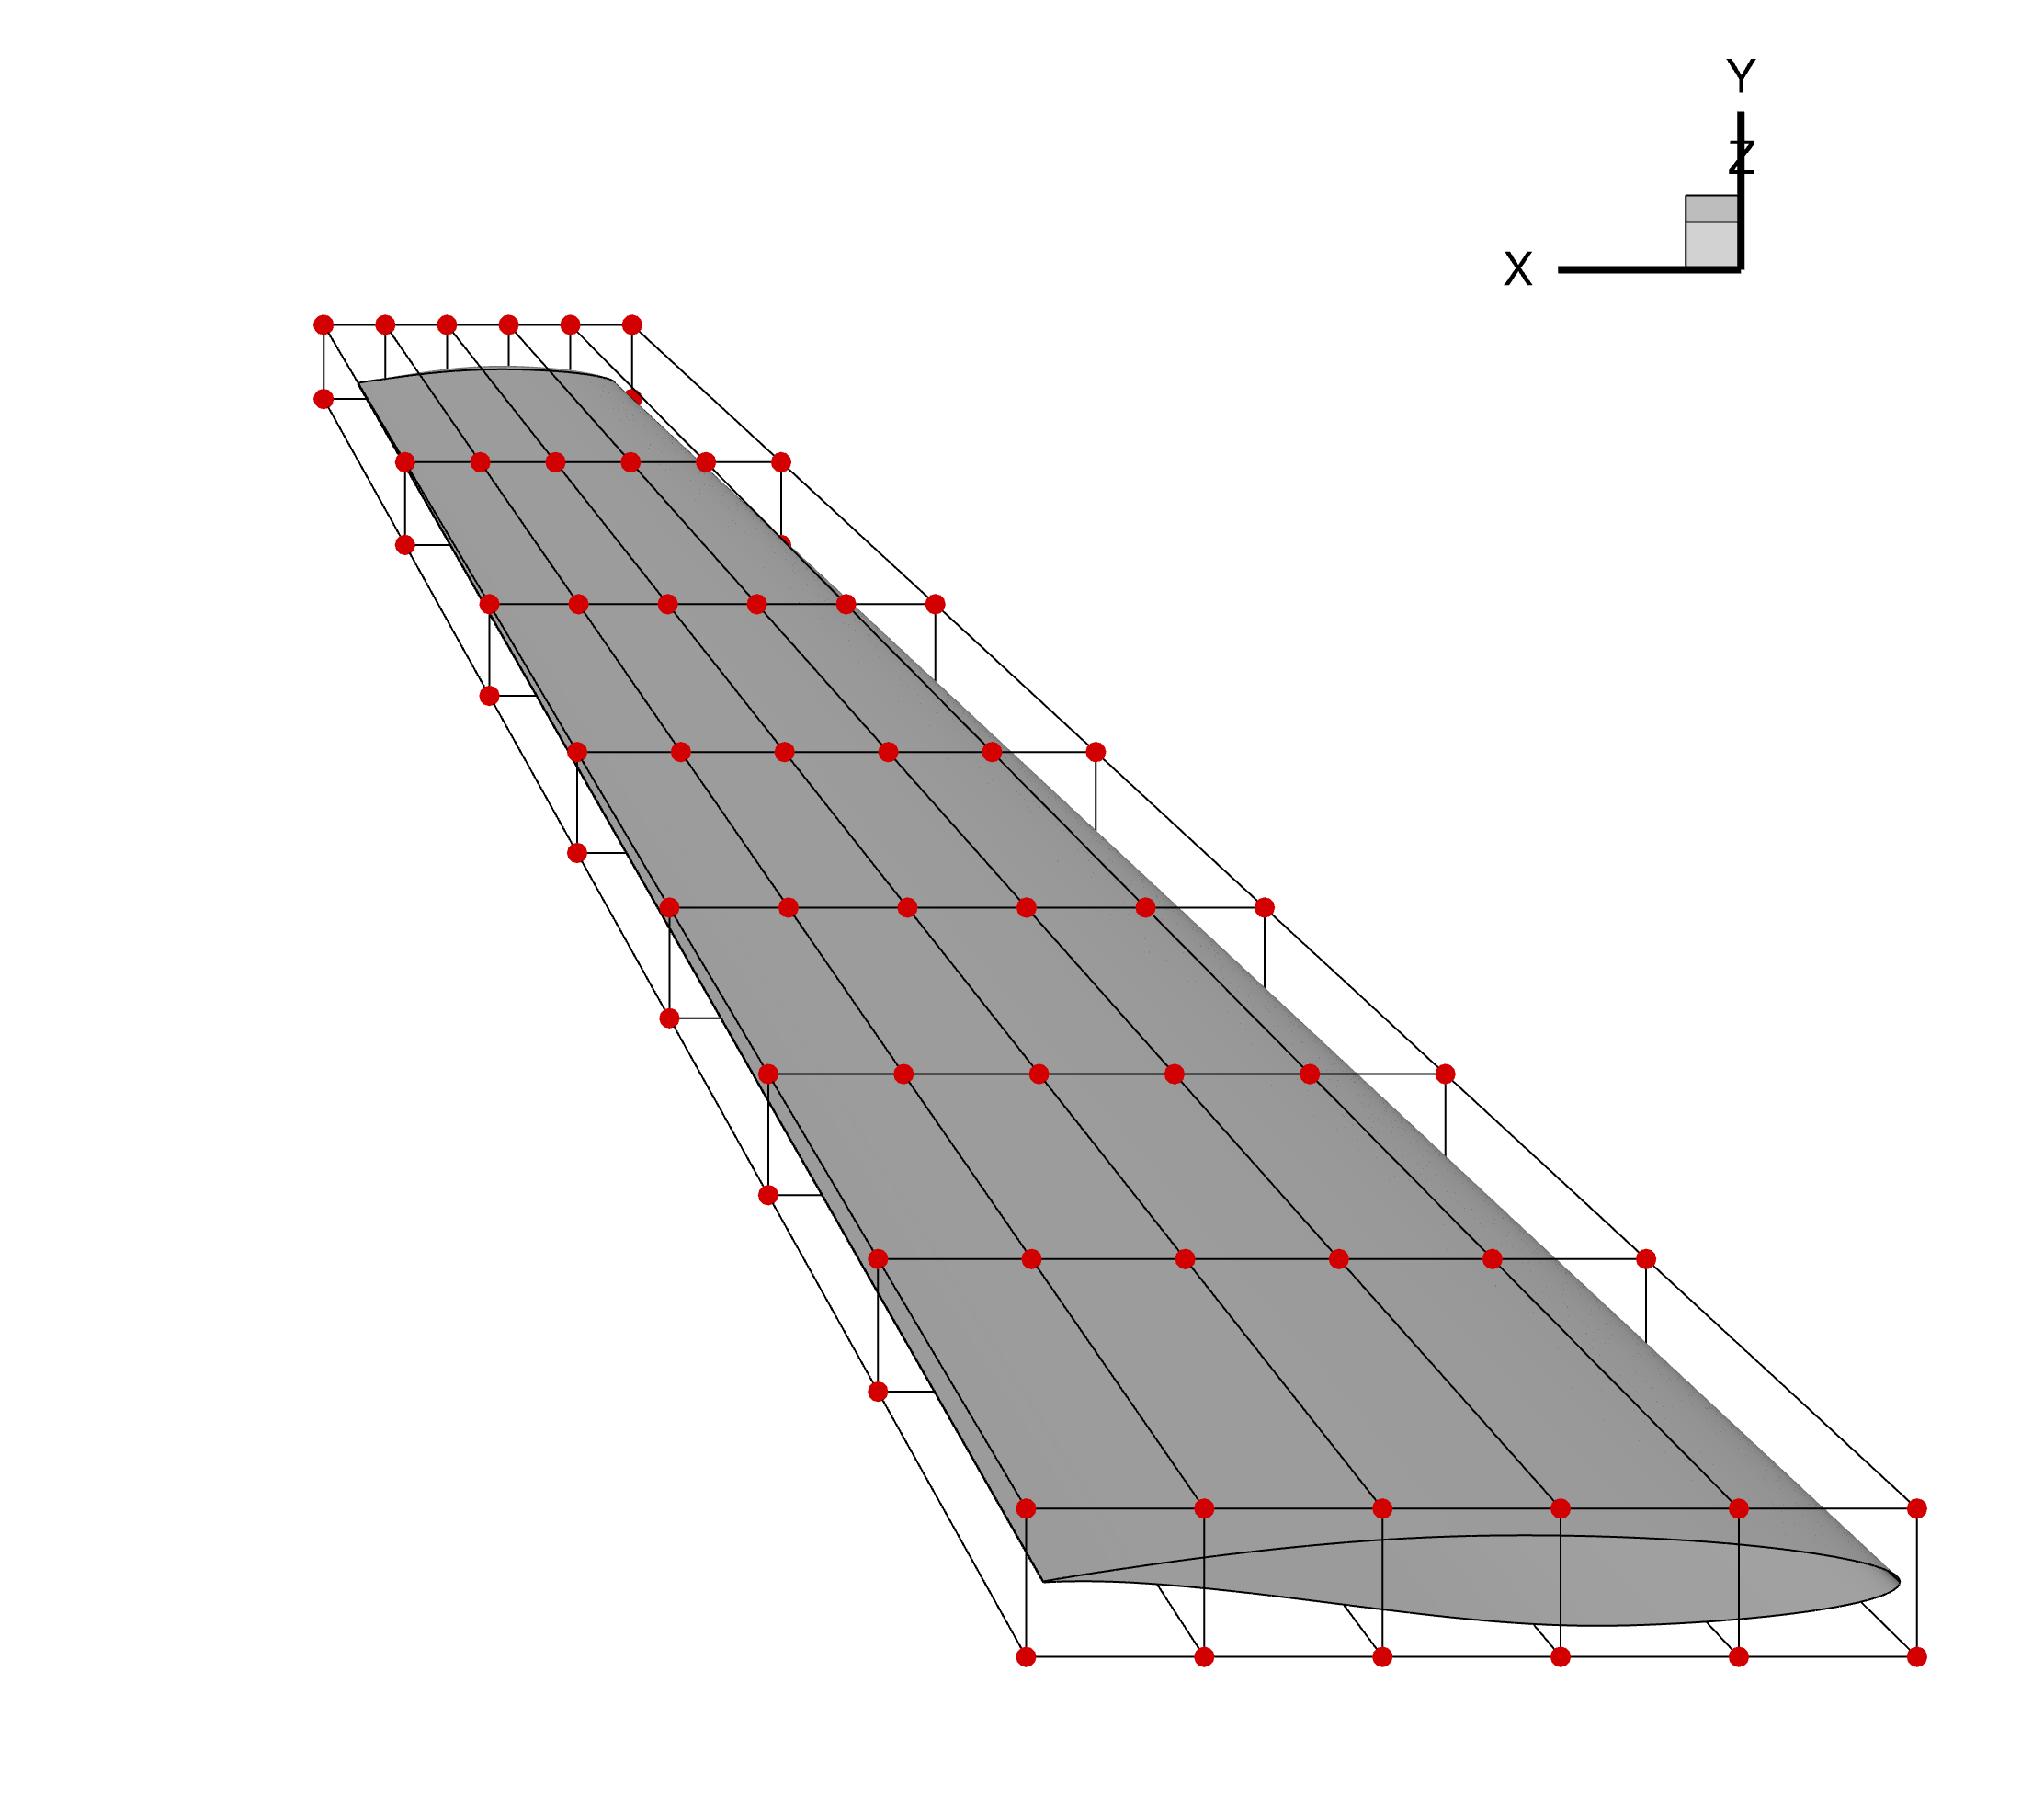 Initial wing geometry and undeformed FFD grid